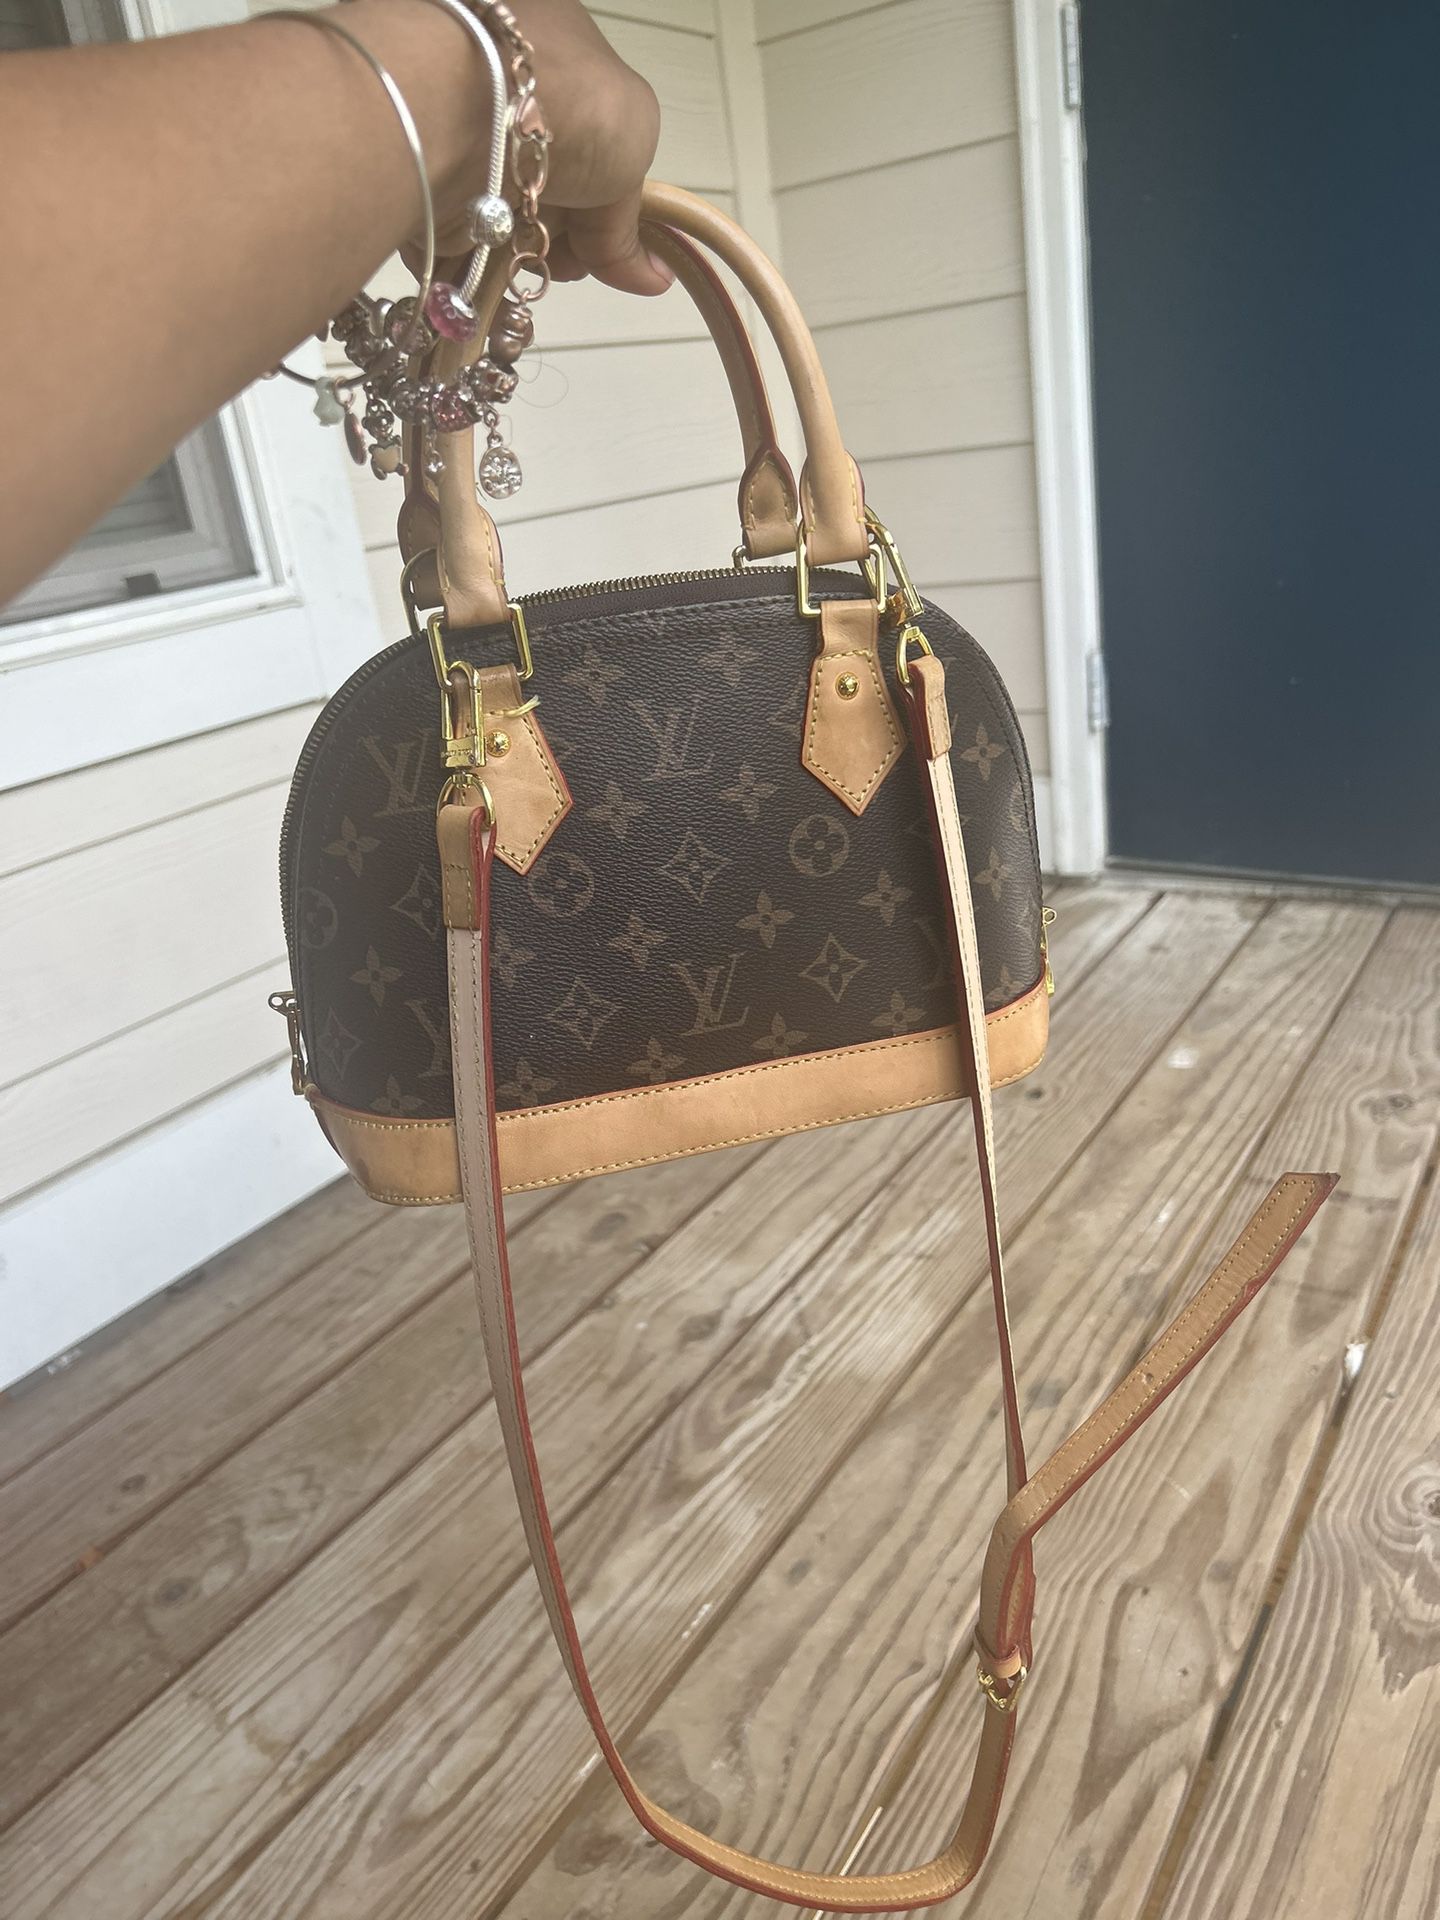 Authentic Louis Vuitton Luggage for Sale in Katy, TX - OfferUp